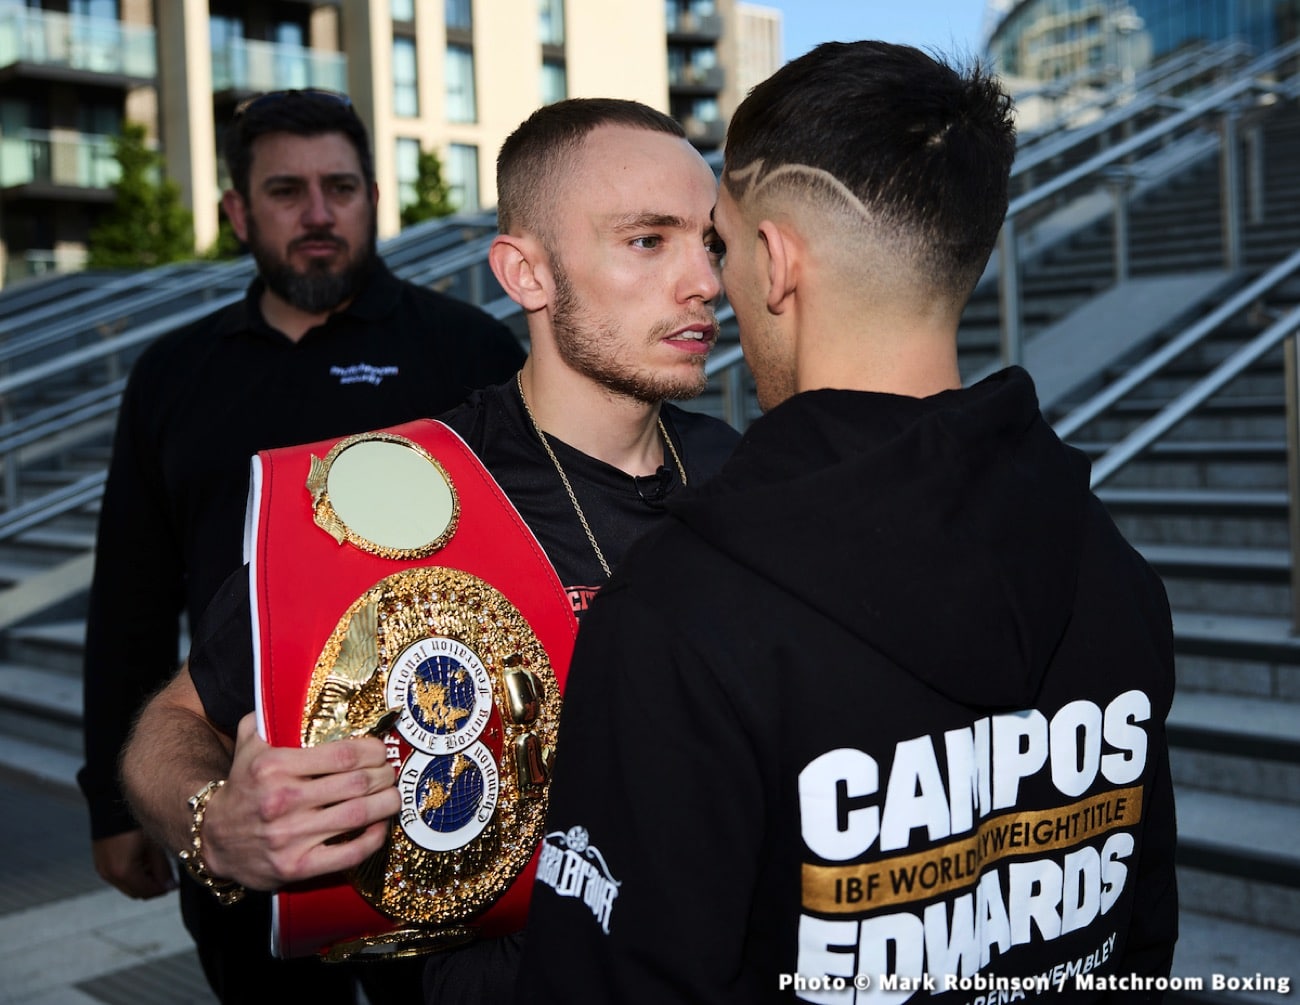 Edwards vs. Campos – Tonight’s Live Results From London